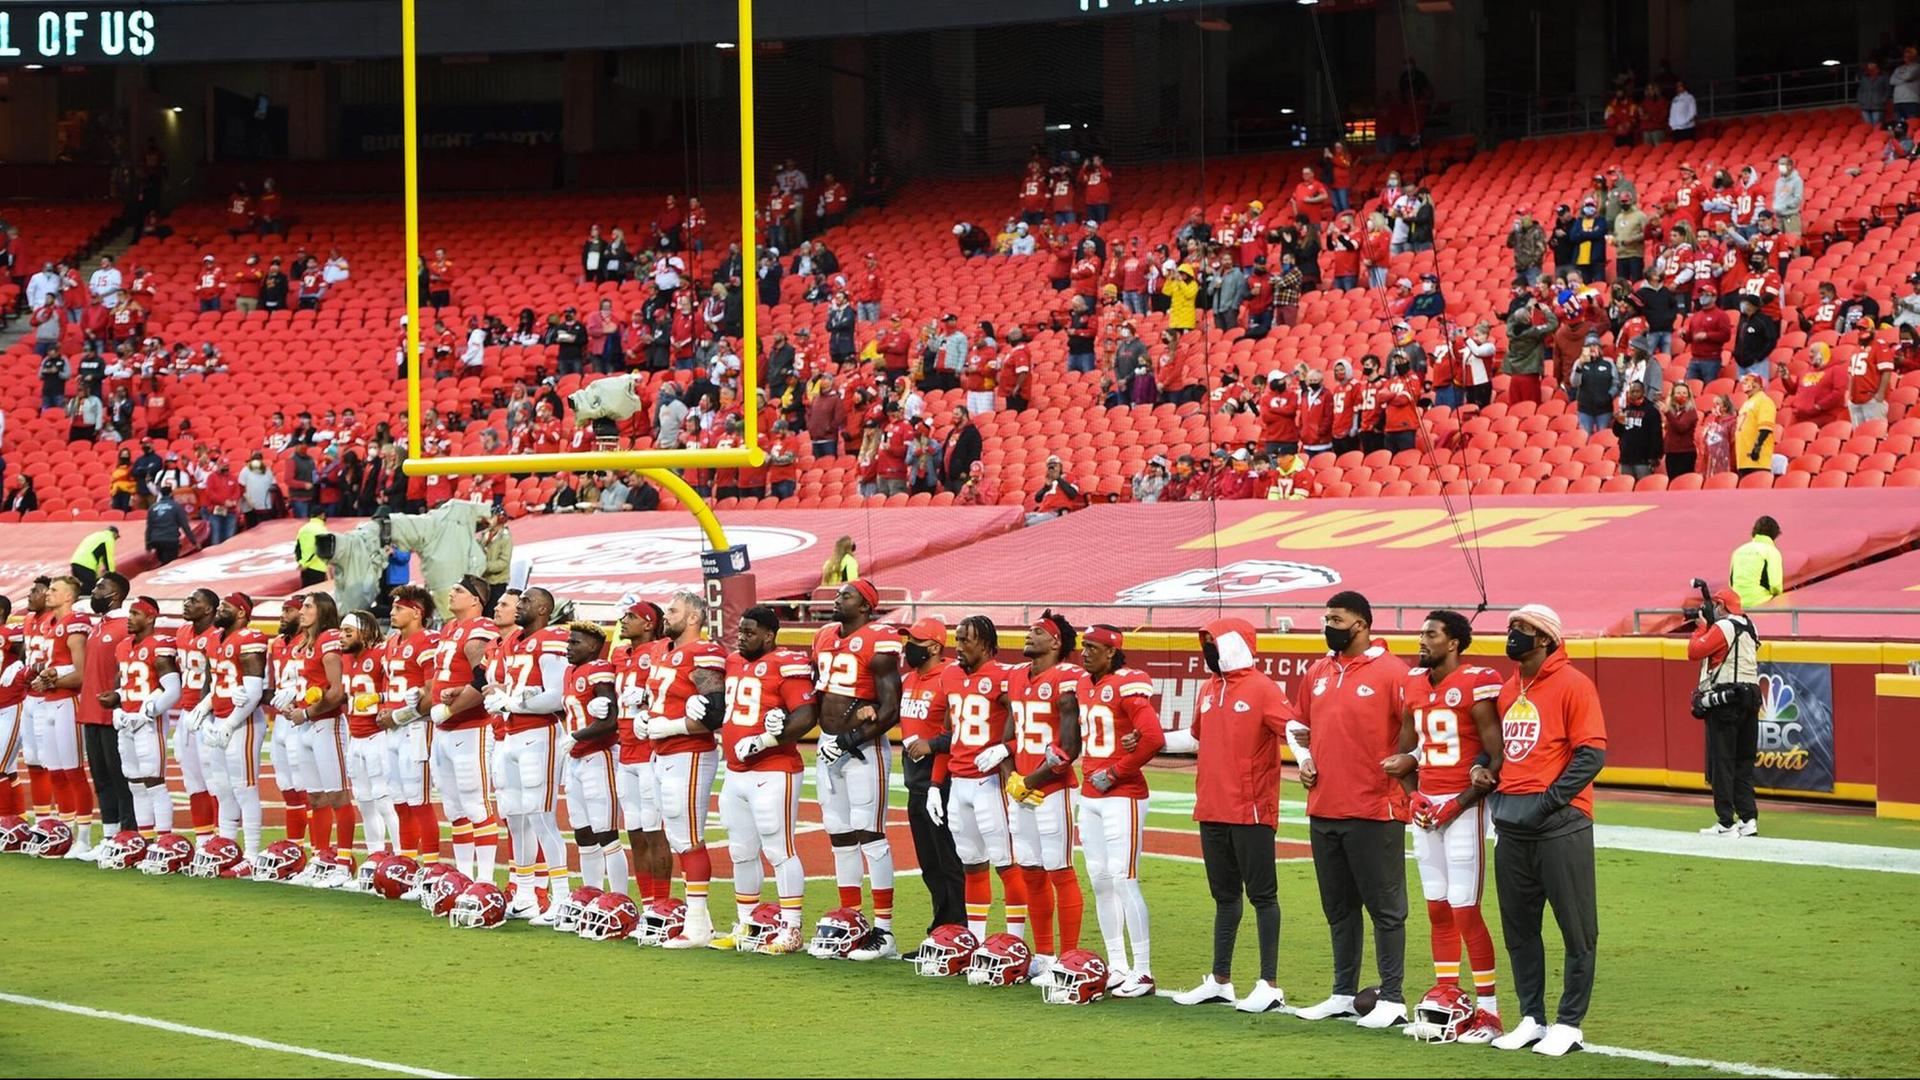 September 10, 2019, Kansas City, MO, USA: Members of the Kansas City Chiefs lock arms and stand for the playing of Lift Every Voice and Sing , a song considered by many as the Black national anthem, during pregame ceremonies Thursday, September 10, 2020 before the Chiefs took on the Houston Texans in the NFL, American Football Herren, USA season opener at Arrowhead Stadium in Kansas City, Missouri. Kansas City USA - ZUMAm67_ 20190910_zaf_m67_055 Copyright: xTammyxLjungbladx